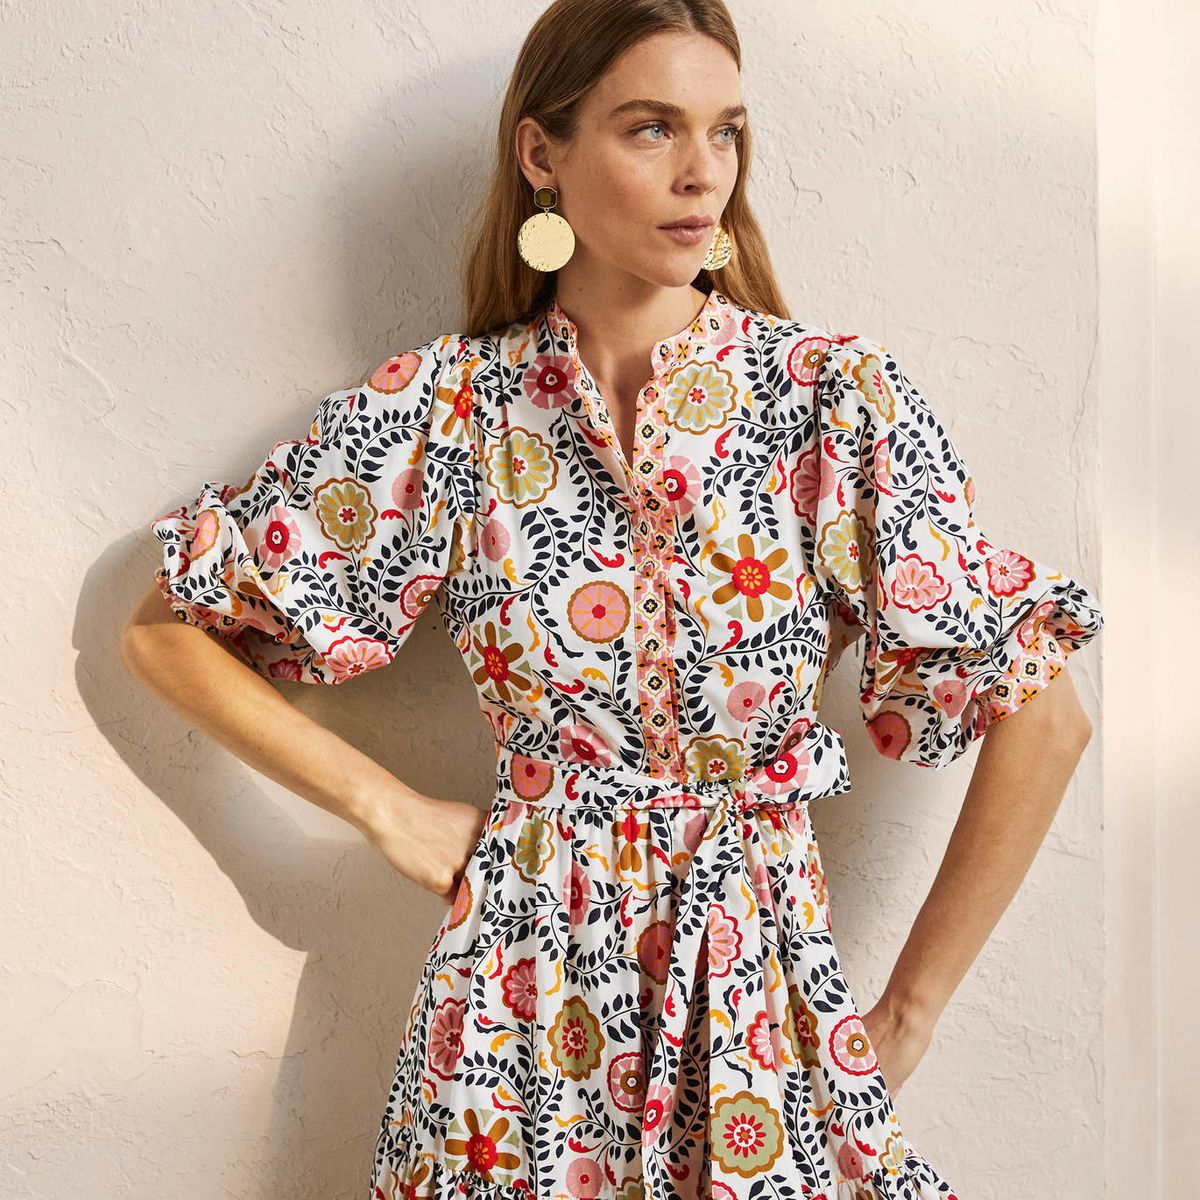 Boden's Ava Maxi Dress is a hit with fans